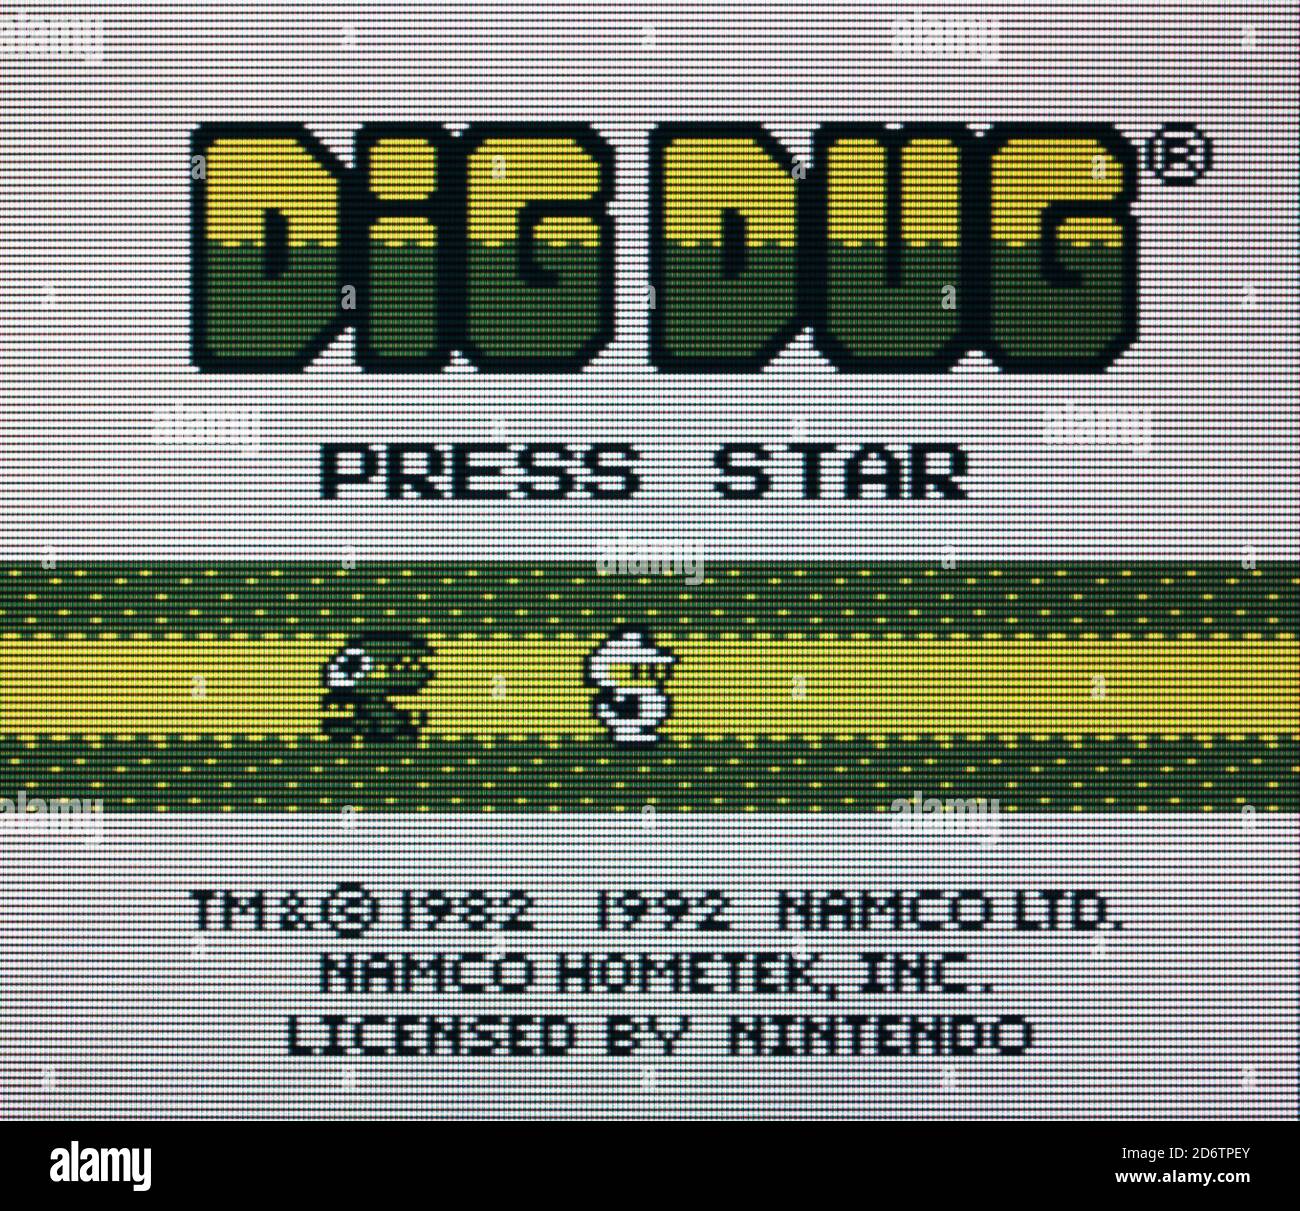 Dig Dug - Nintendo Gameboy Videogame - Editorial use only Stock Photo